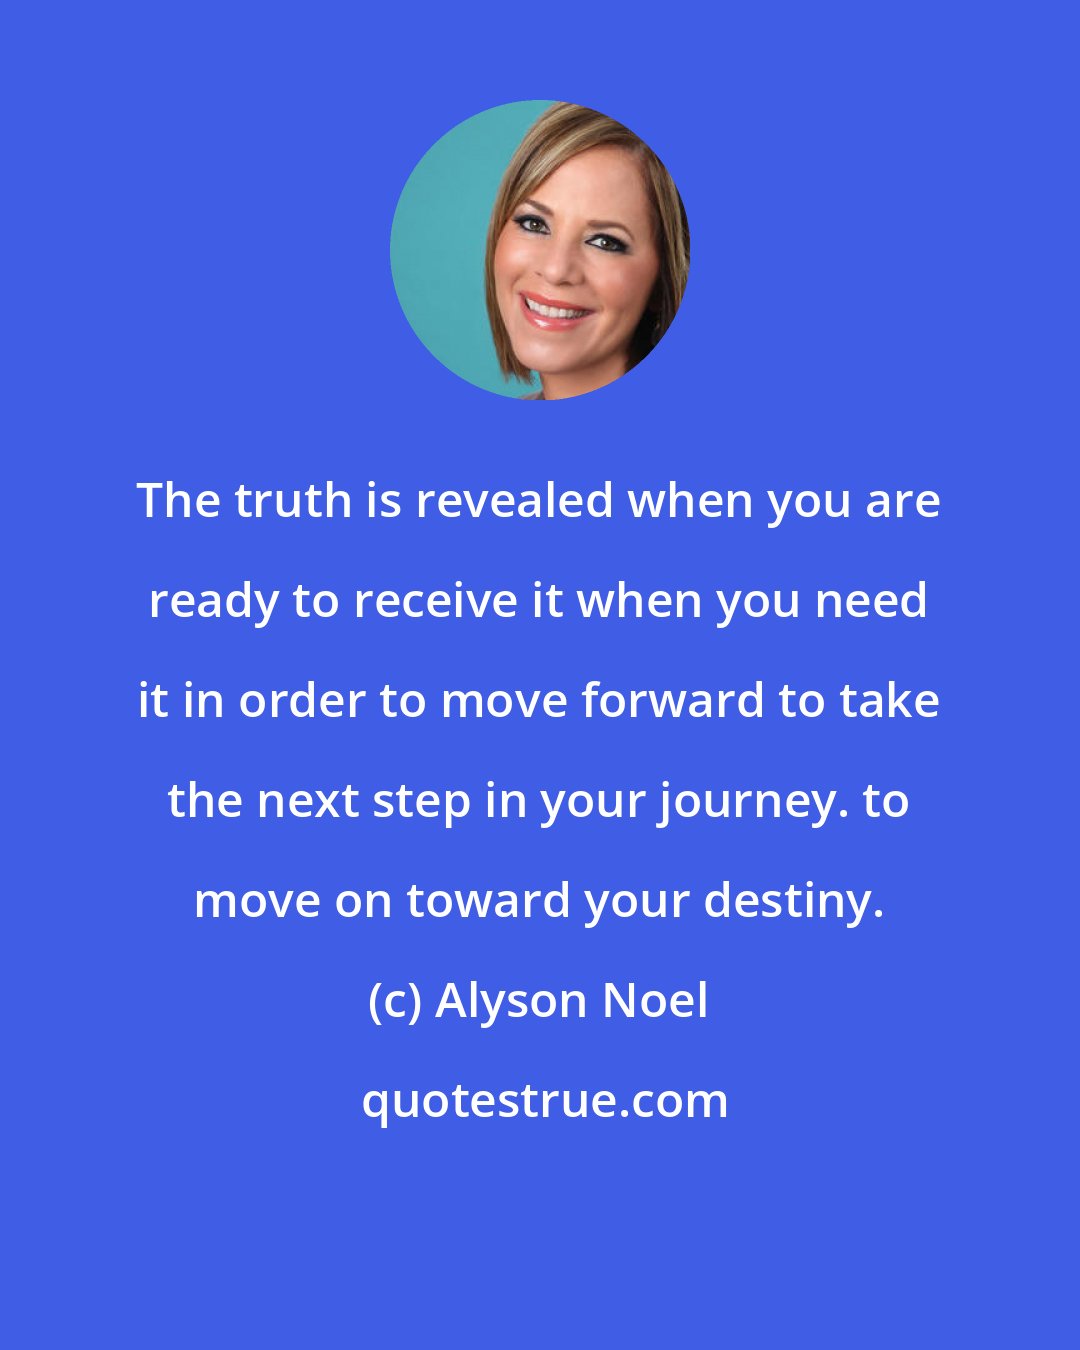 Alyson Noel: The truth is revealed when you are ready to receive it when you need it in order to move forward to take the next step in your journey. to move on toward your destiny.